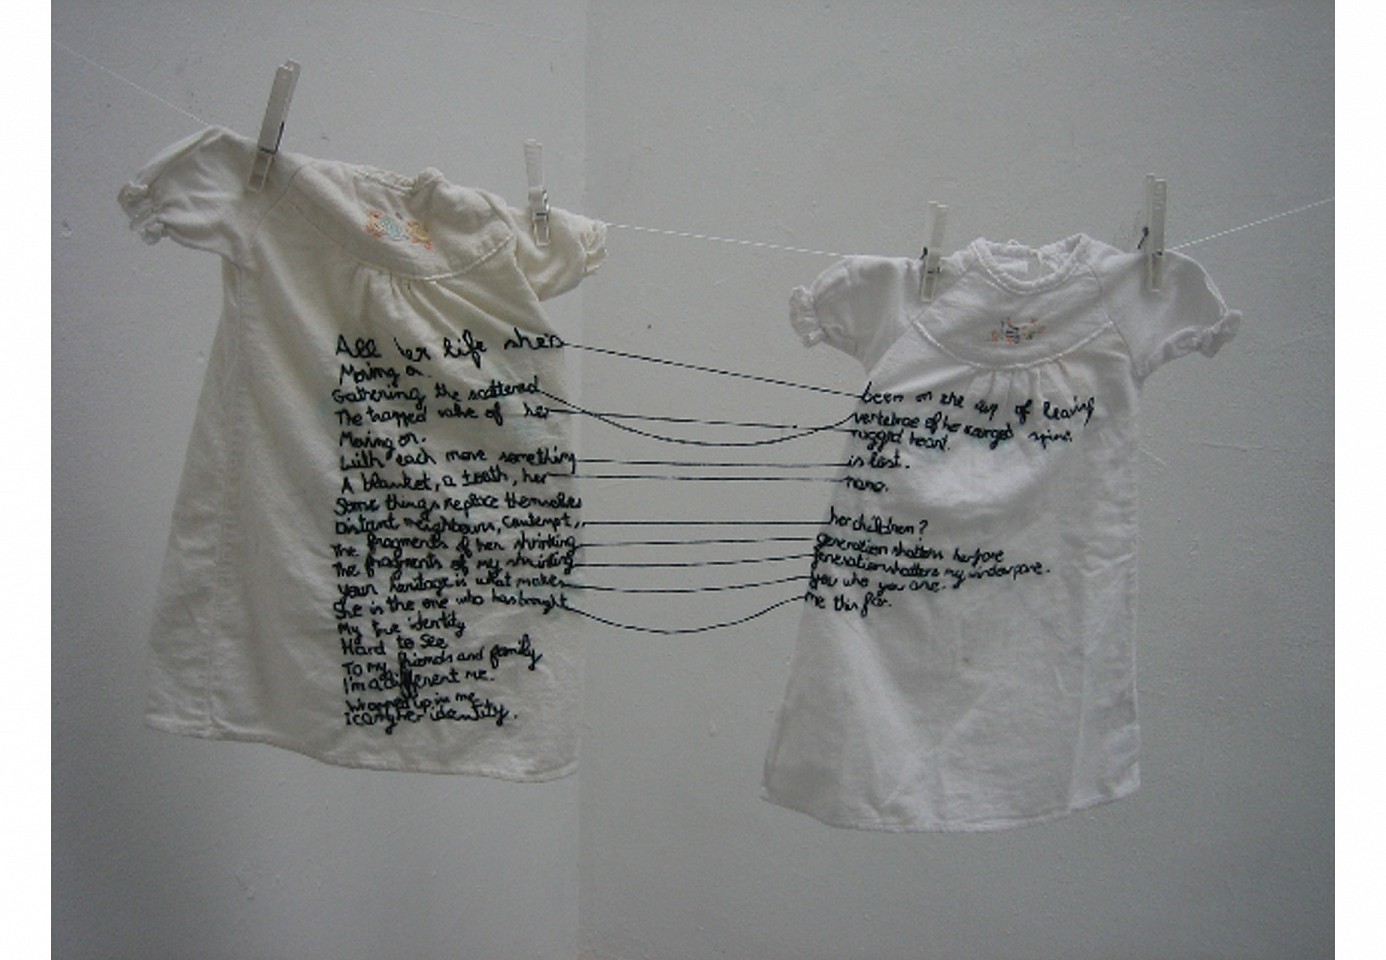 <p><span class="viewer-caption-artist">Aya Haidar</span></p>
<p><span class="viewer-caption-title"><i>The Stitch is Lost Unless the Thread is Knotted</i></span>, <span class="viewer-caption-year">2008</span></p>
<p><span class="viewer-caption-media">Shirts and thread</span></p>
<p><span class="viewer-caption-inventory">AYH0060</span></p>
<p><span class="viewer-caption-aux"></span></p>